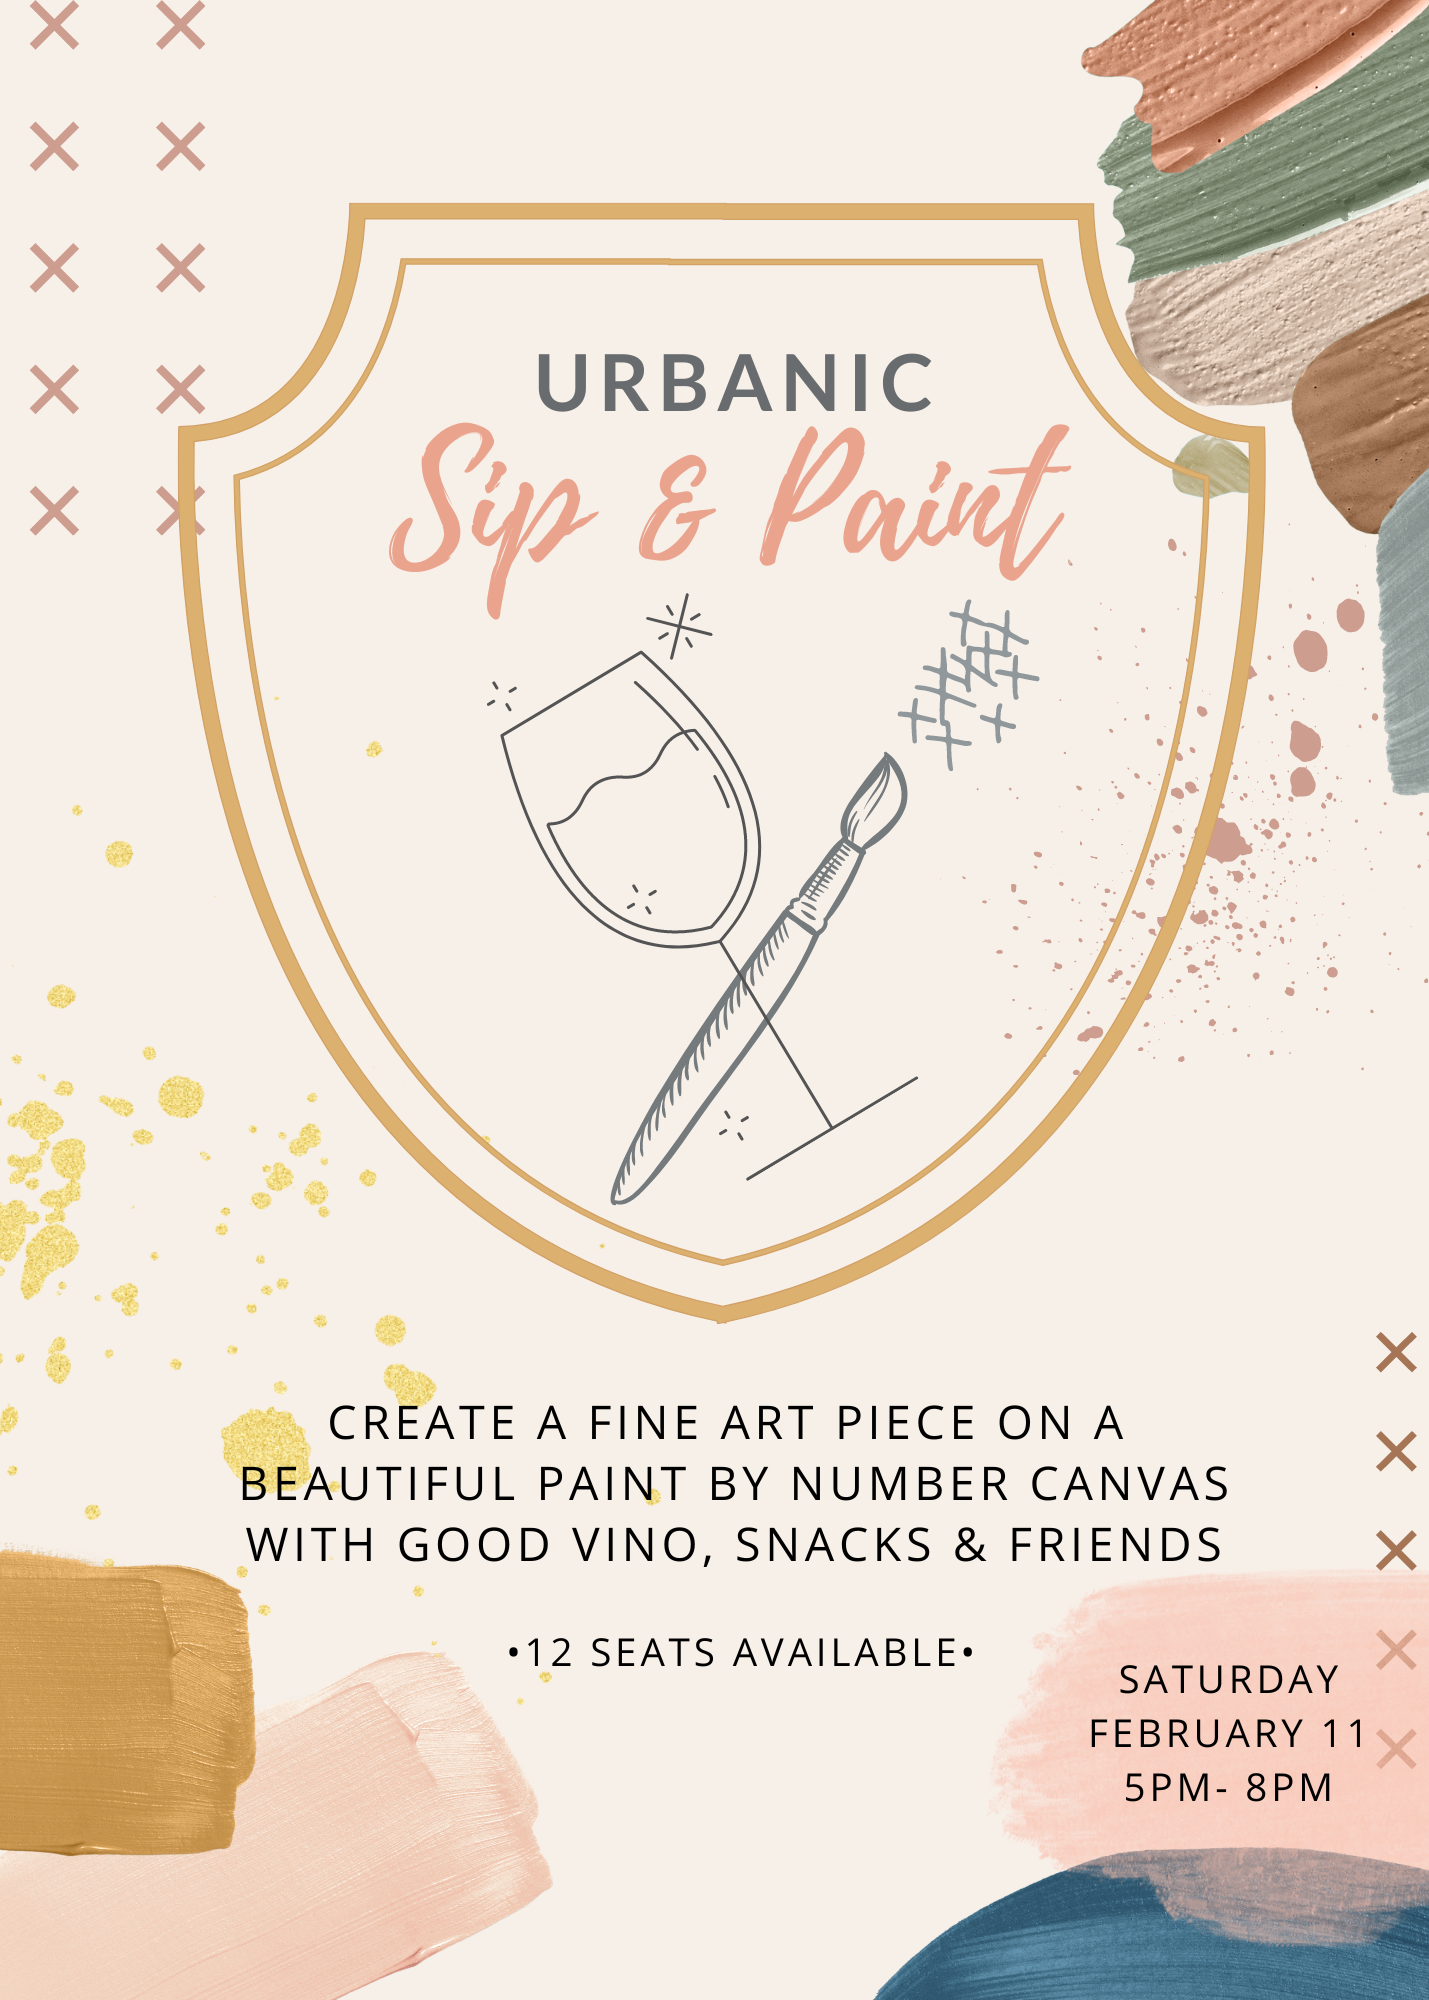 urbanic paper boutique los angeles stationery gifts sip and paint class workshop event information